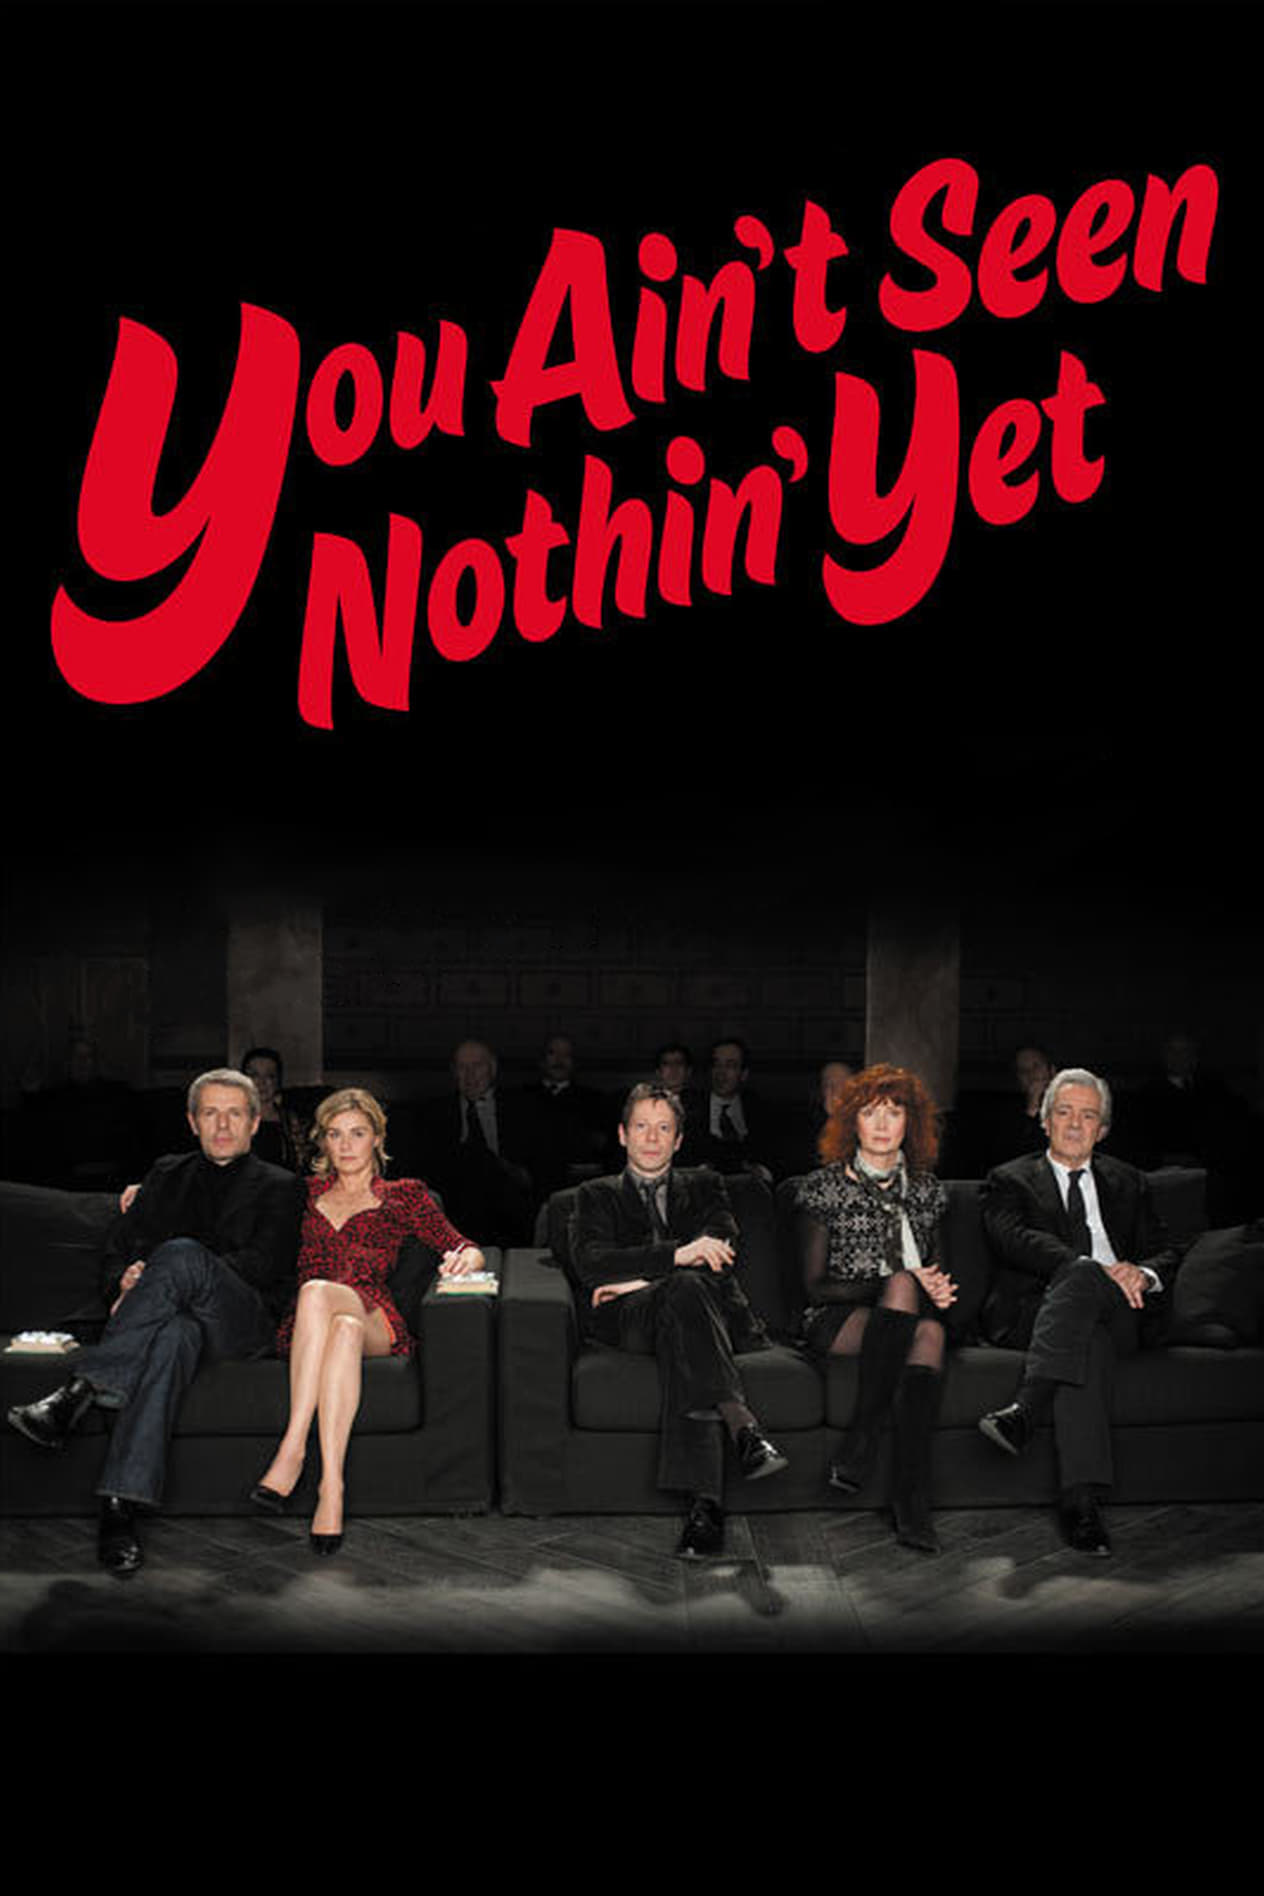 You Ain't Seen Nothin' Yet (2012)